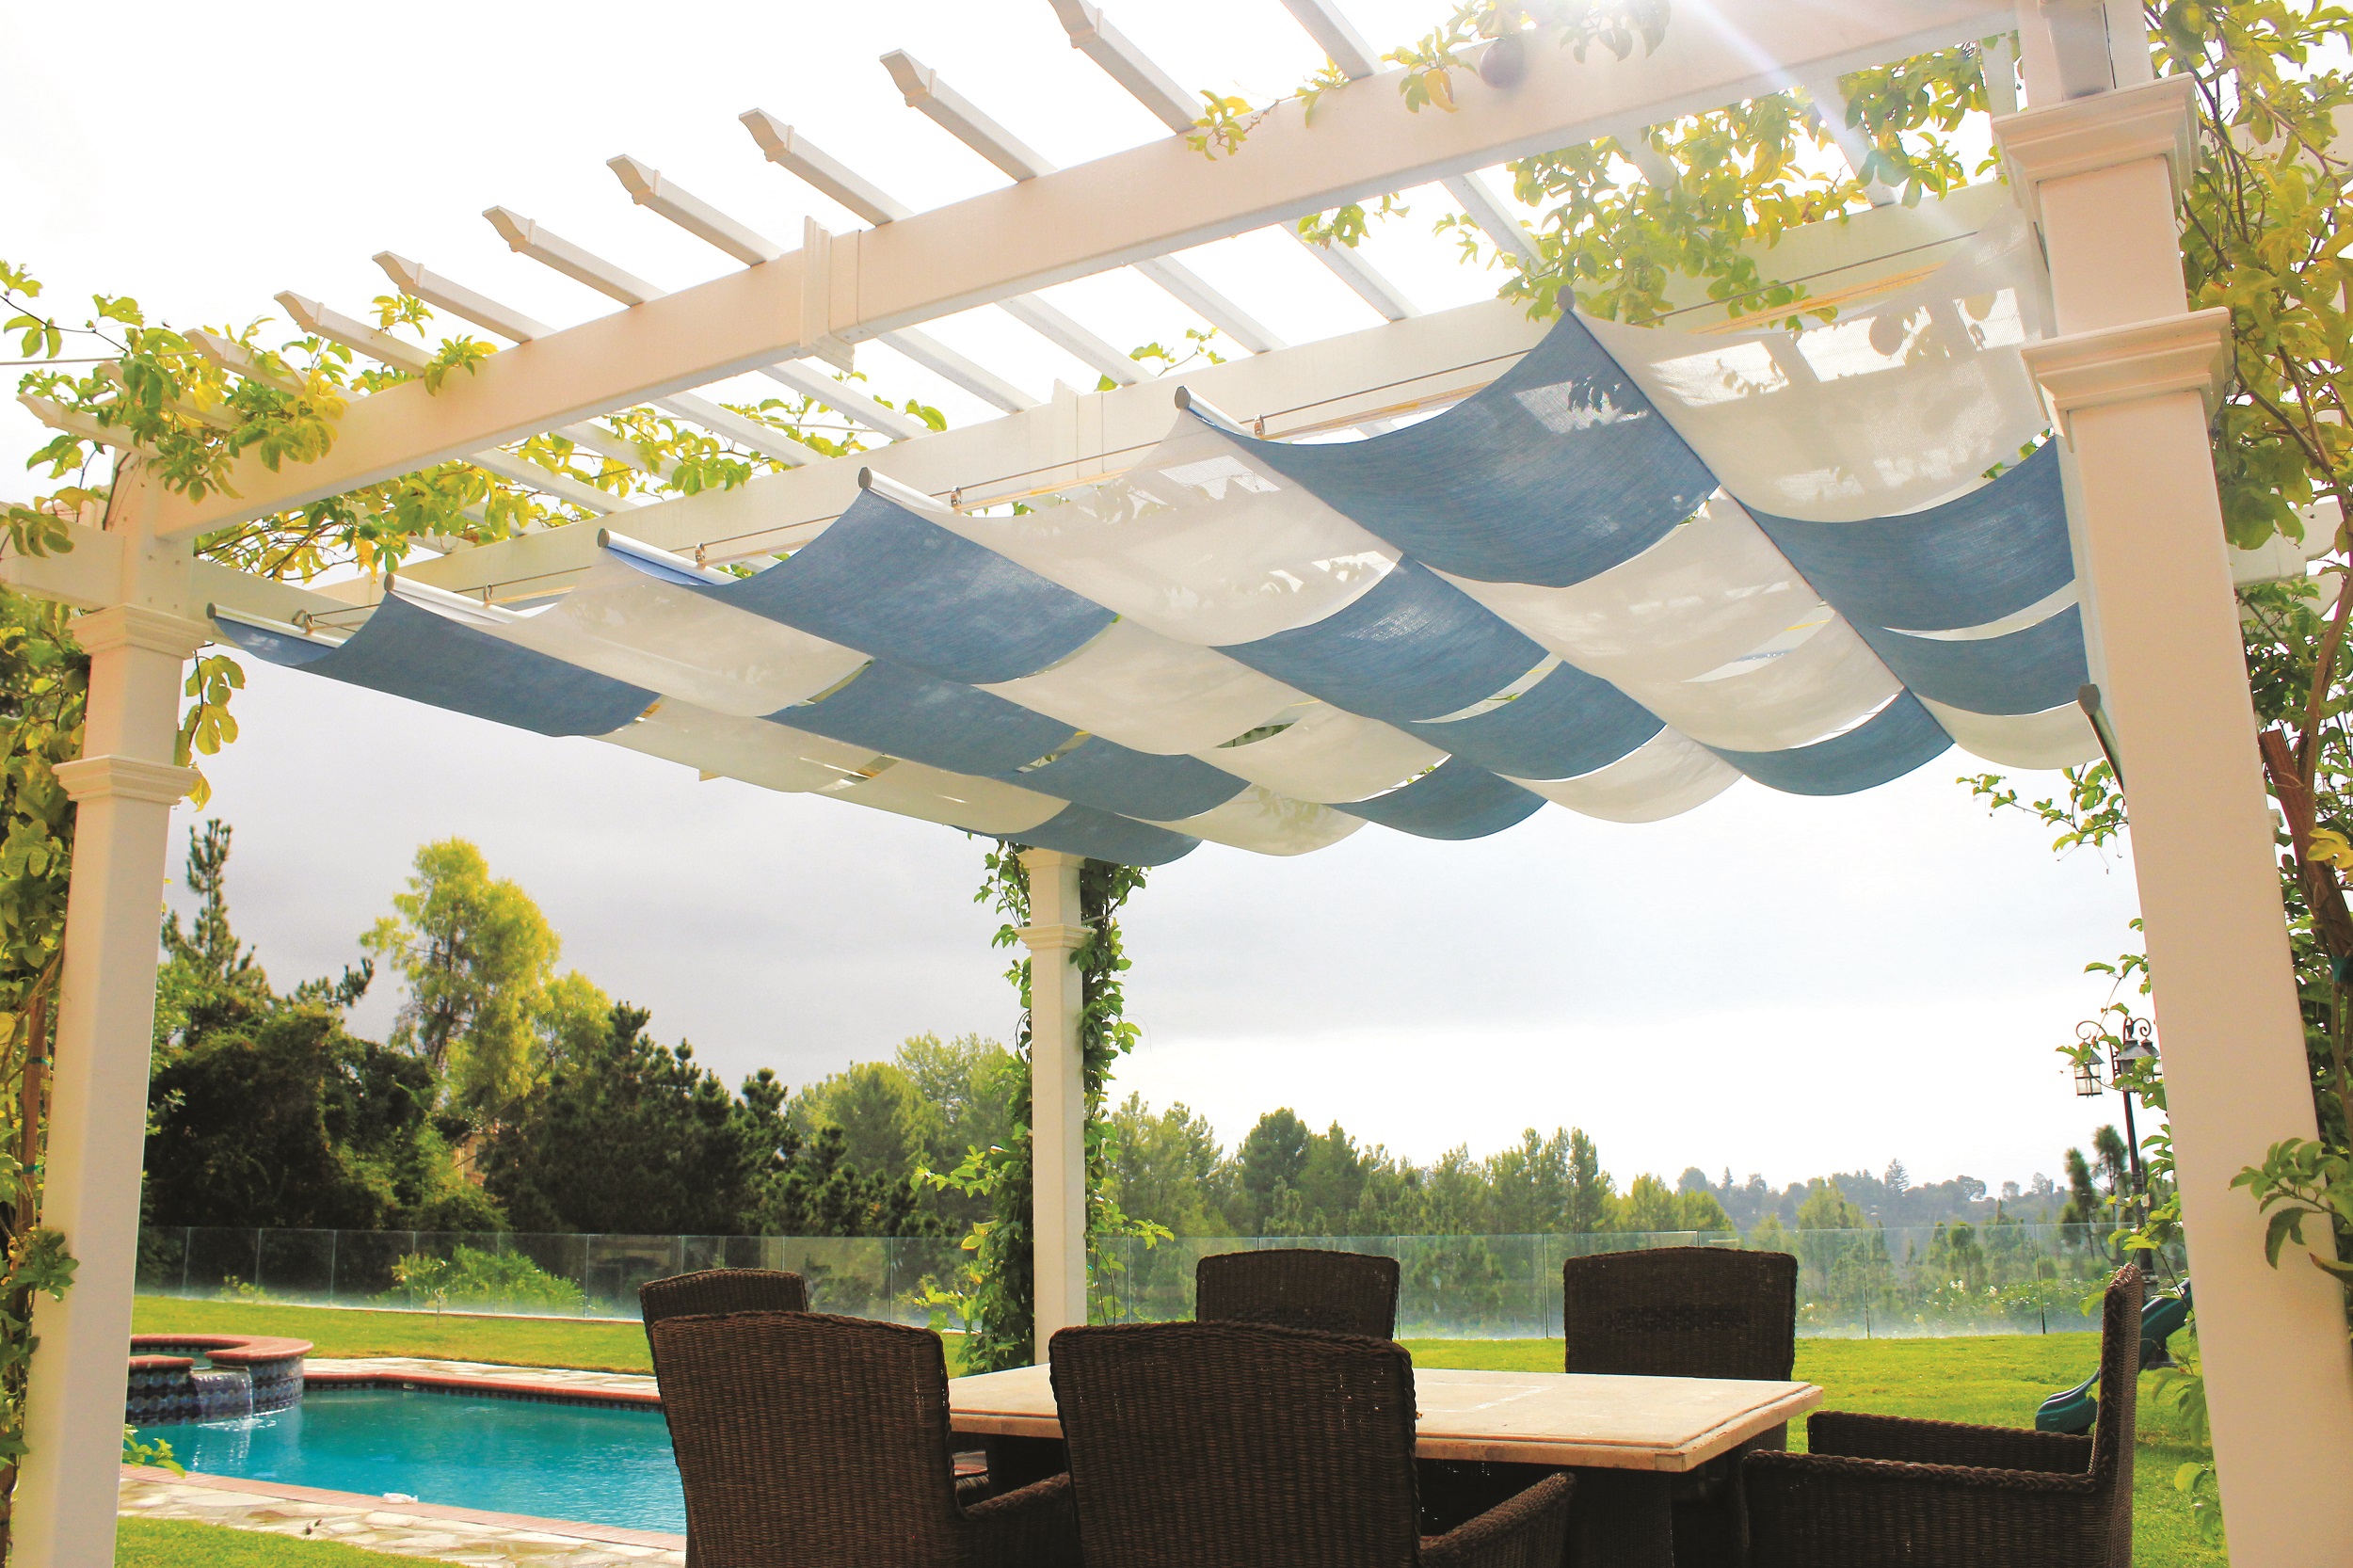 Infinity Canopy modular slide on wire shade system